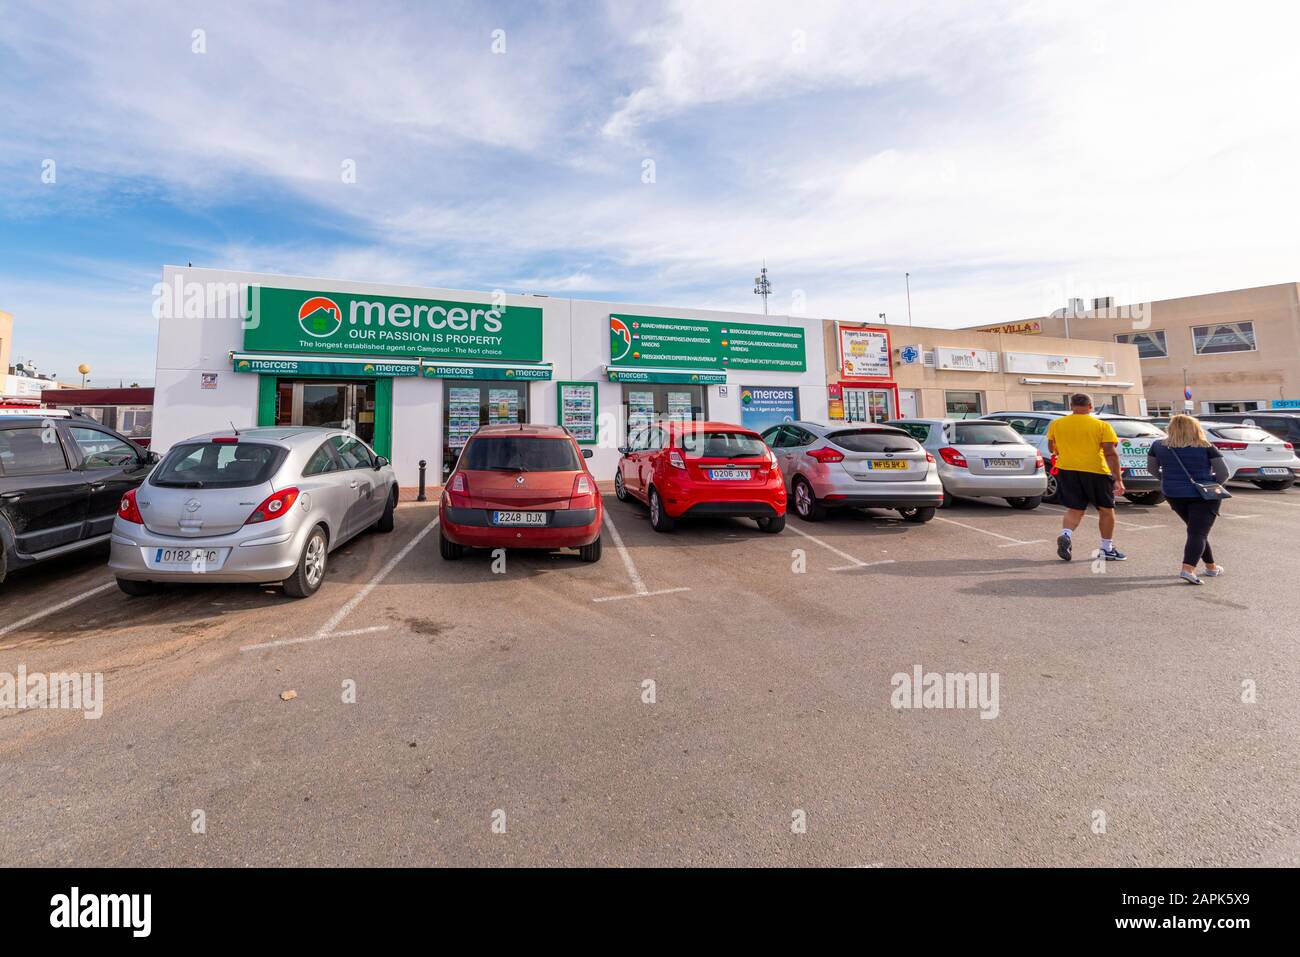 Mercers estate agent in Camposol, Region de Murcia, Costa Calida, Spain. An area popular with ex -pat British property buyers. Property market abroad Stock Photo